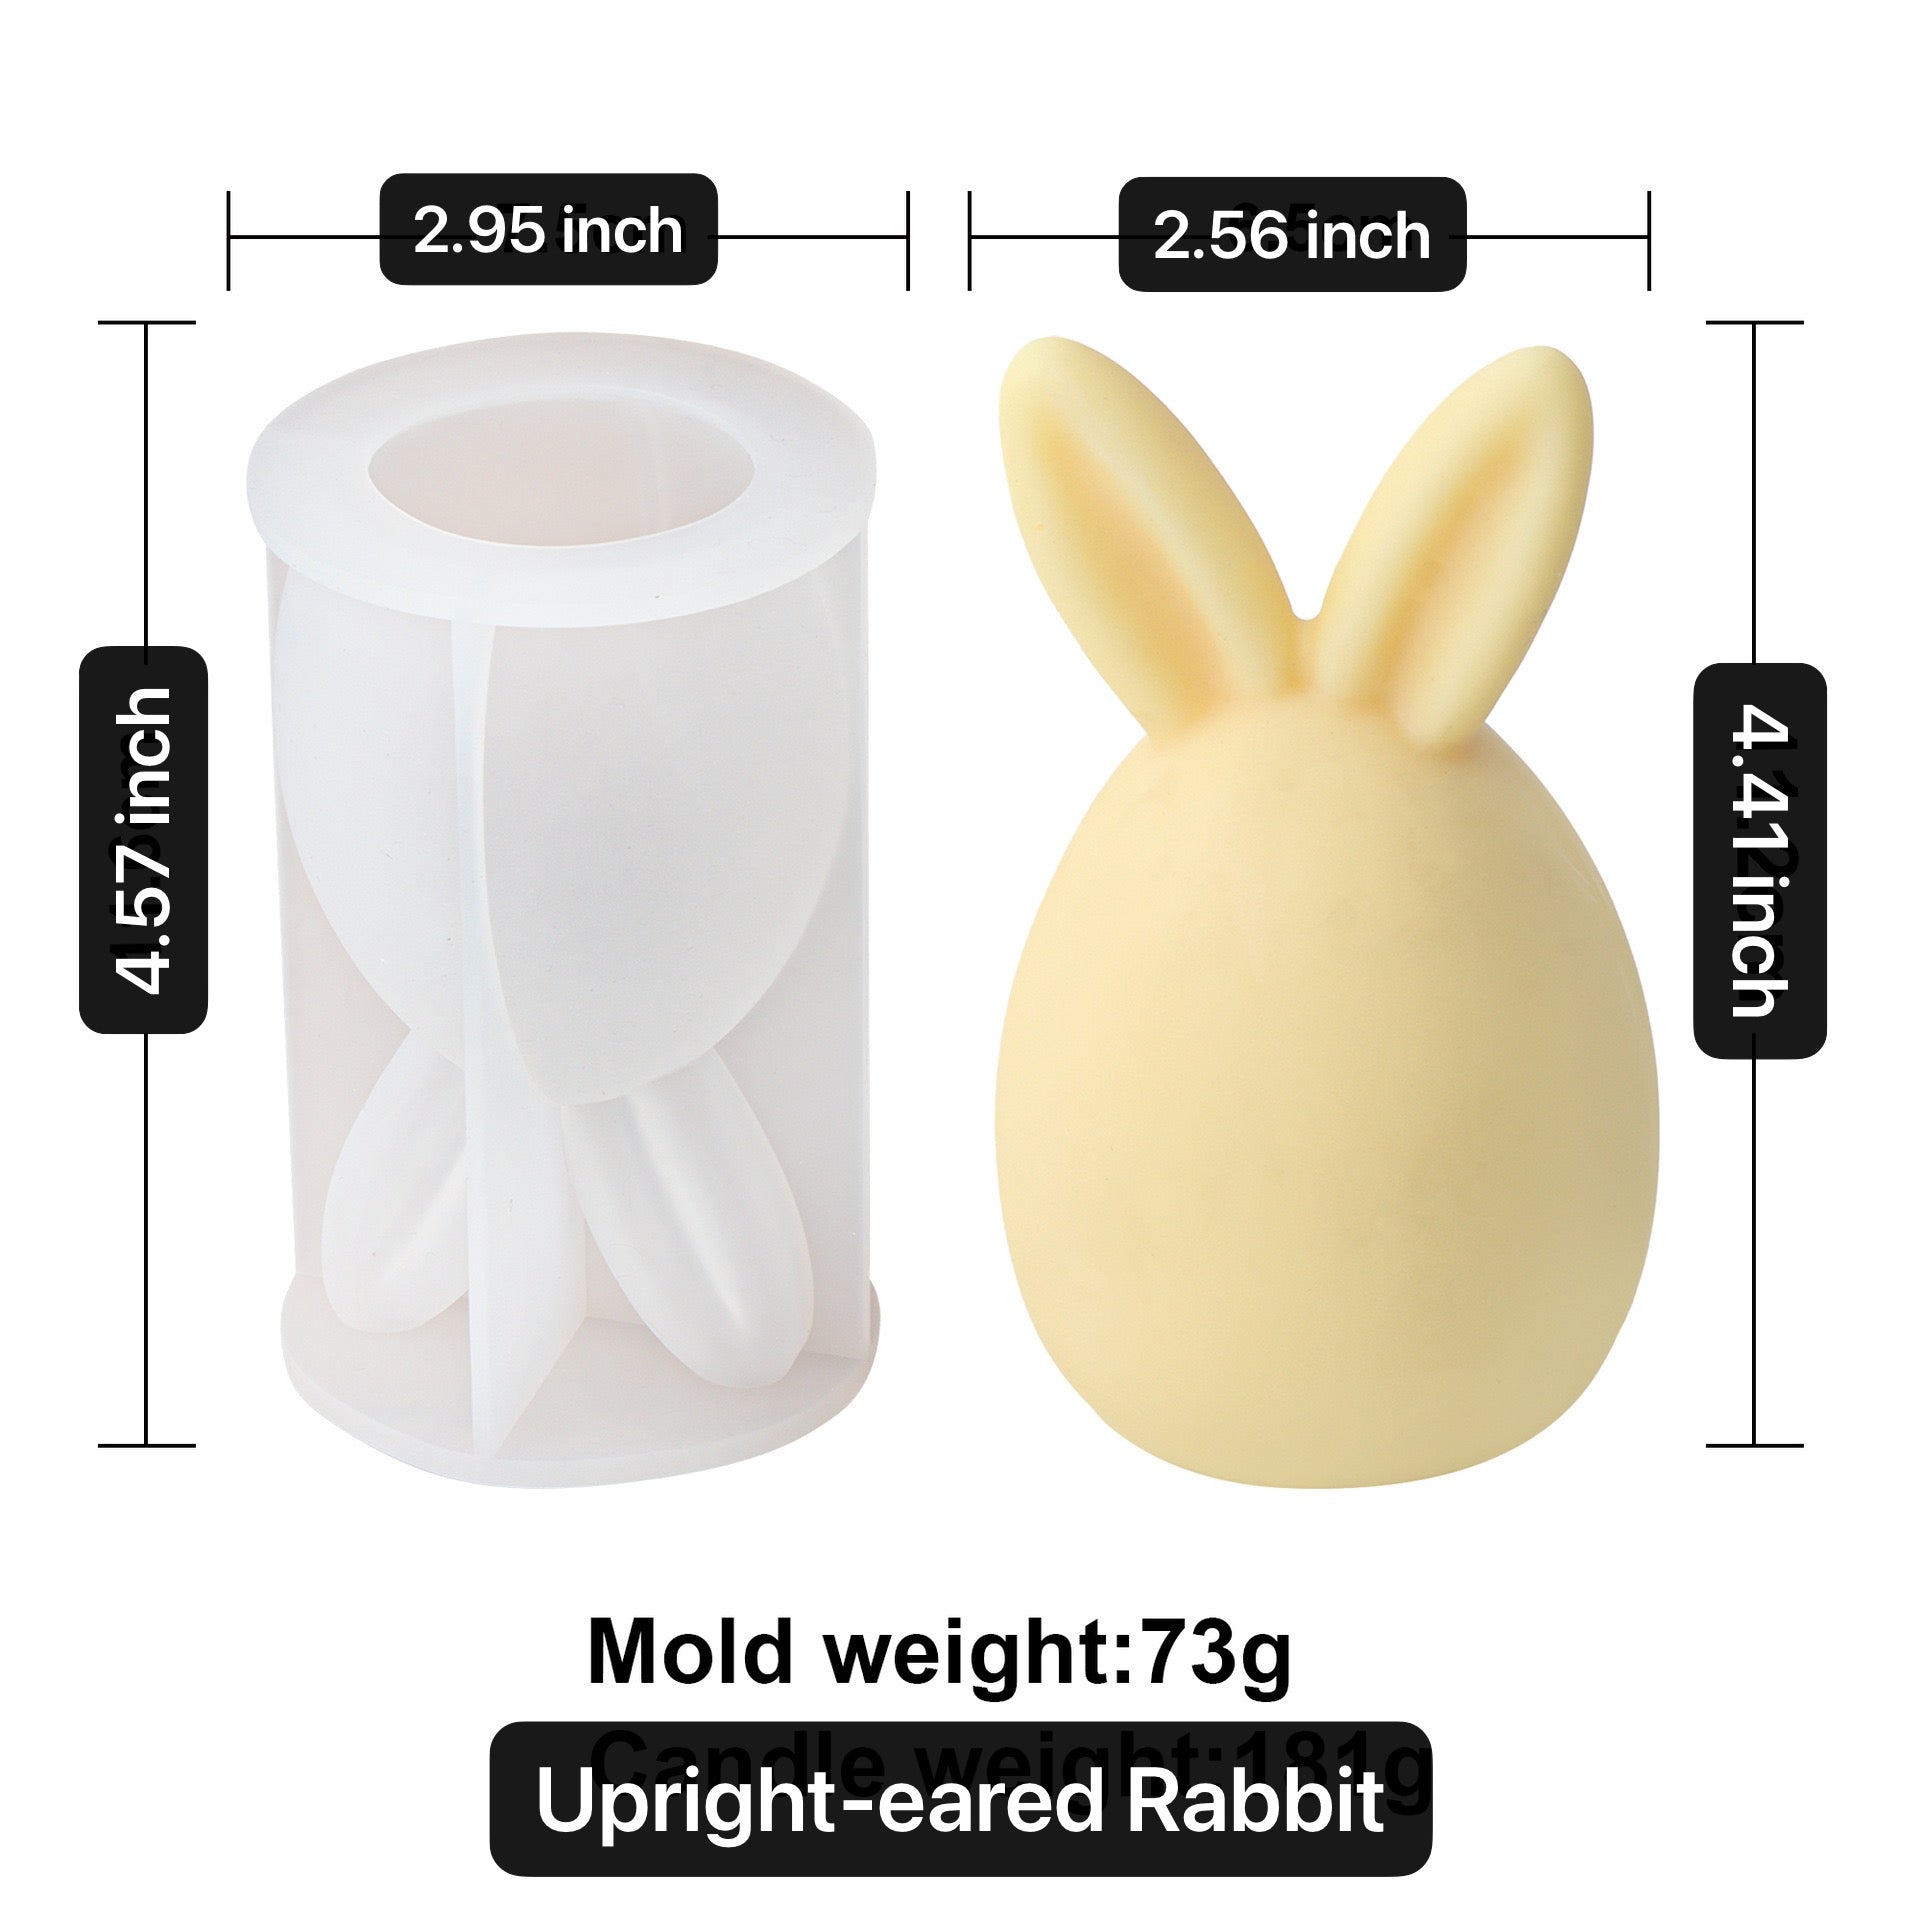 Lrisy Easter Upright-eared Rabbit Silicone Resin Mold